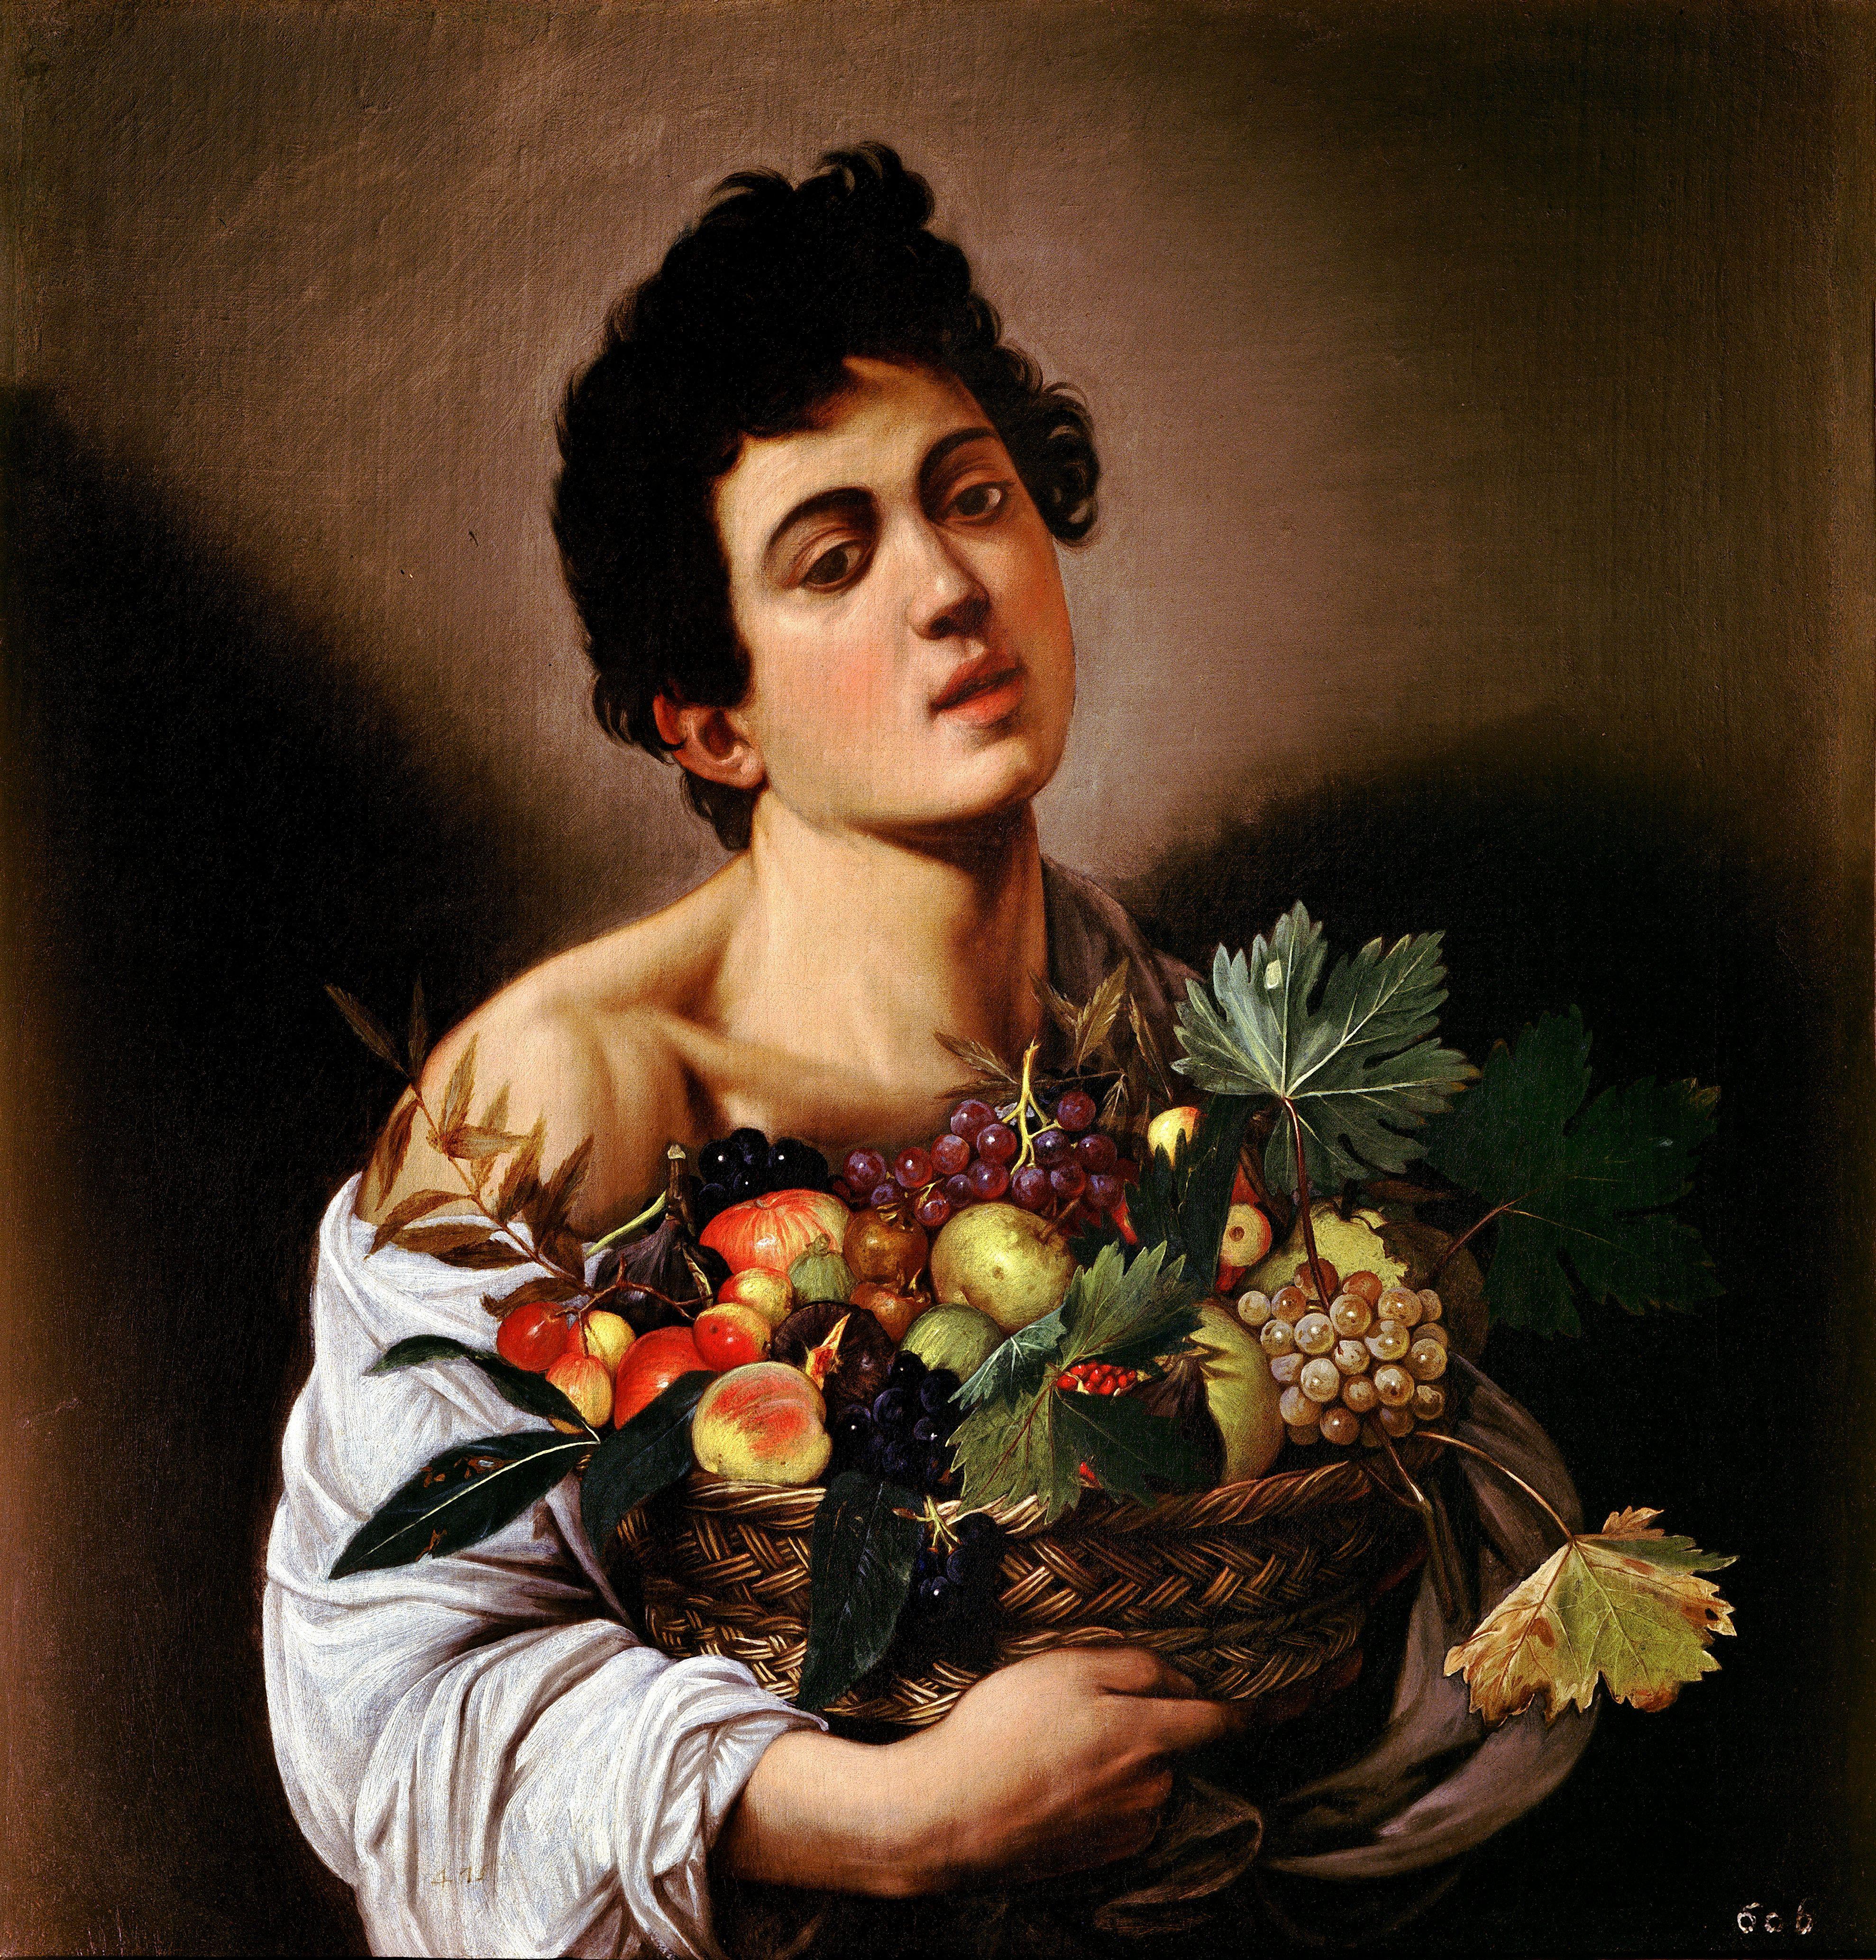 https://uploads5.wikiart.org/00129/images/caravaggio/boy-with-a-basket-of-fruit.jpg